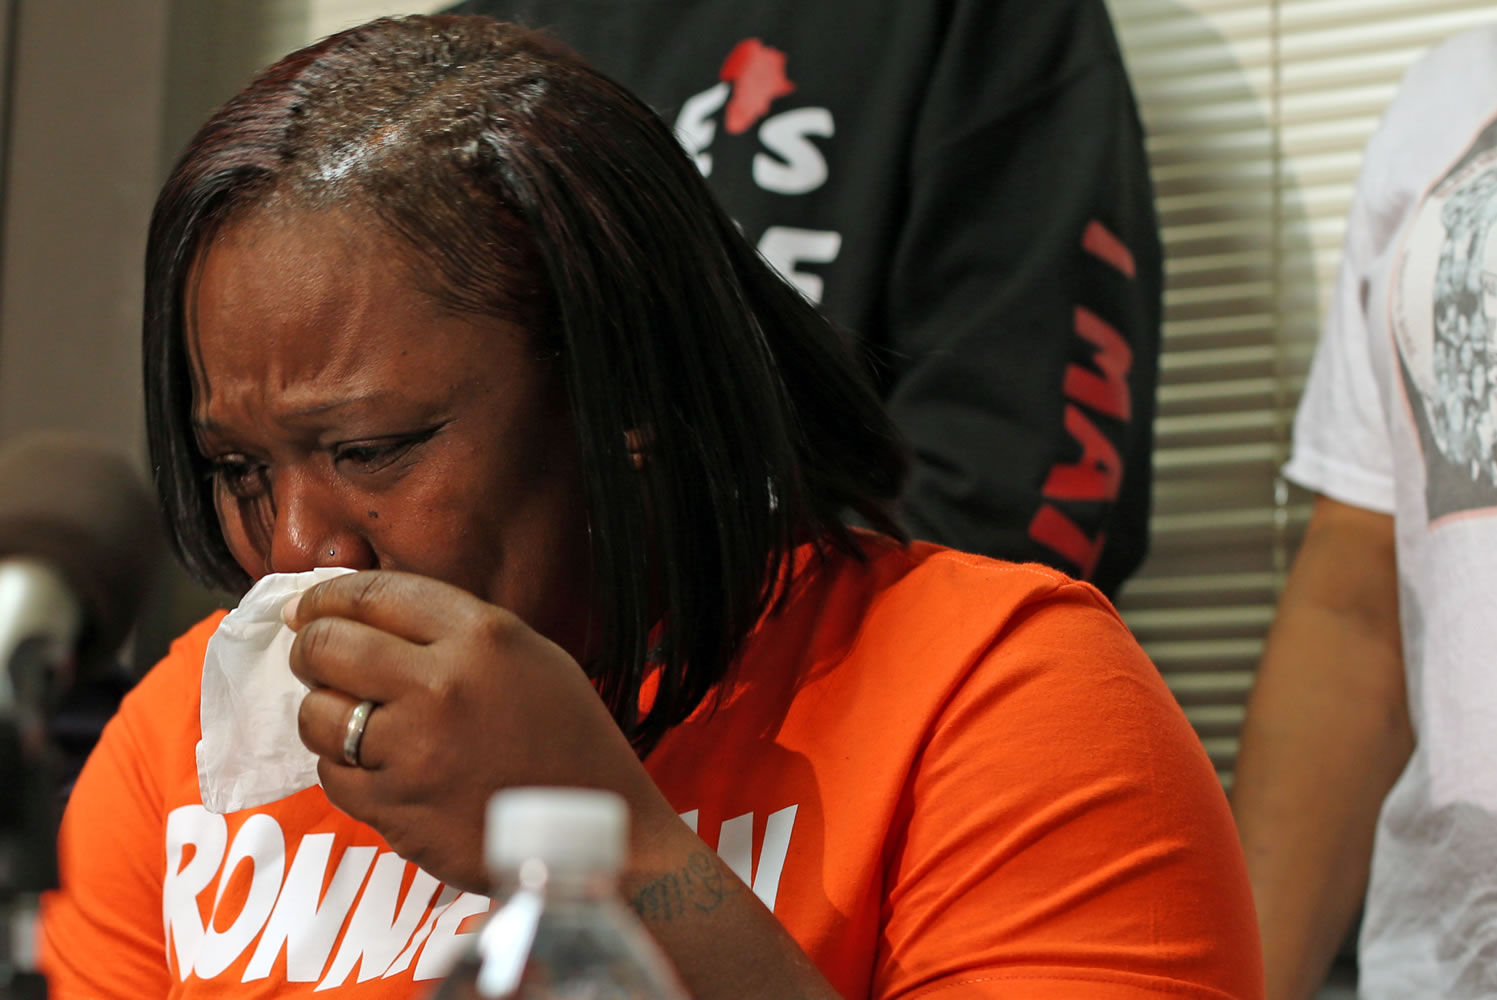 An emotional Dorothy Holmes, the mother of 25-year-old Ronald Johnson, speaks at a news conference Tuesday in Chicago demanding that the dash-cam video of her son being fatally shot by Chicago police on Oct. 12 be released.